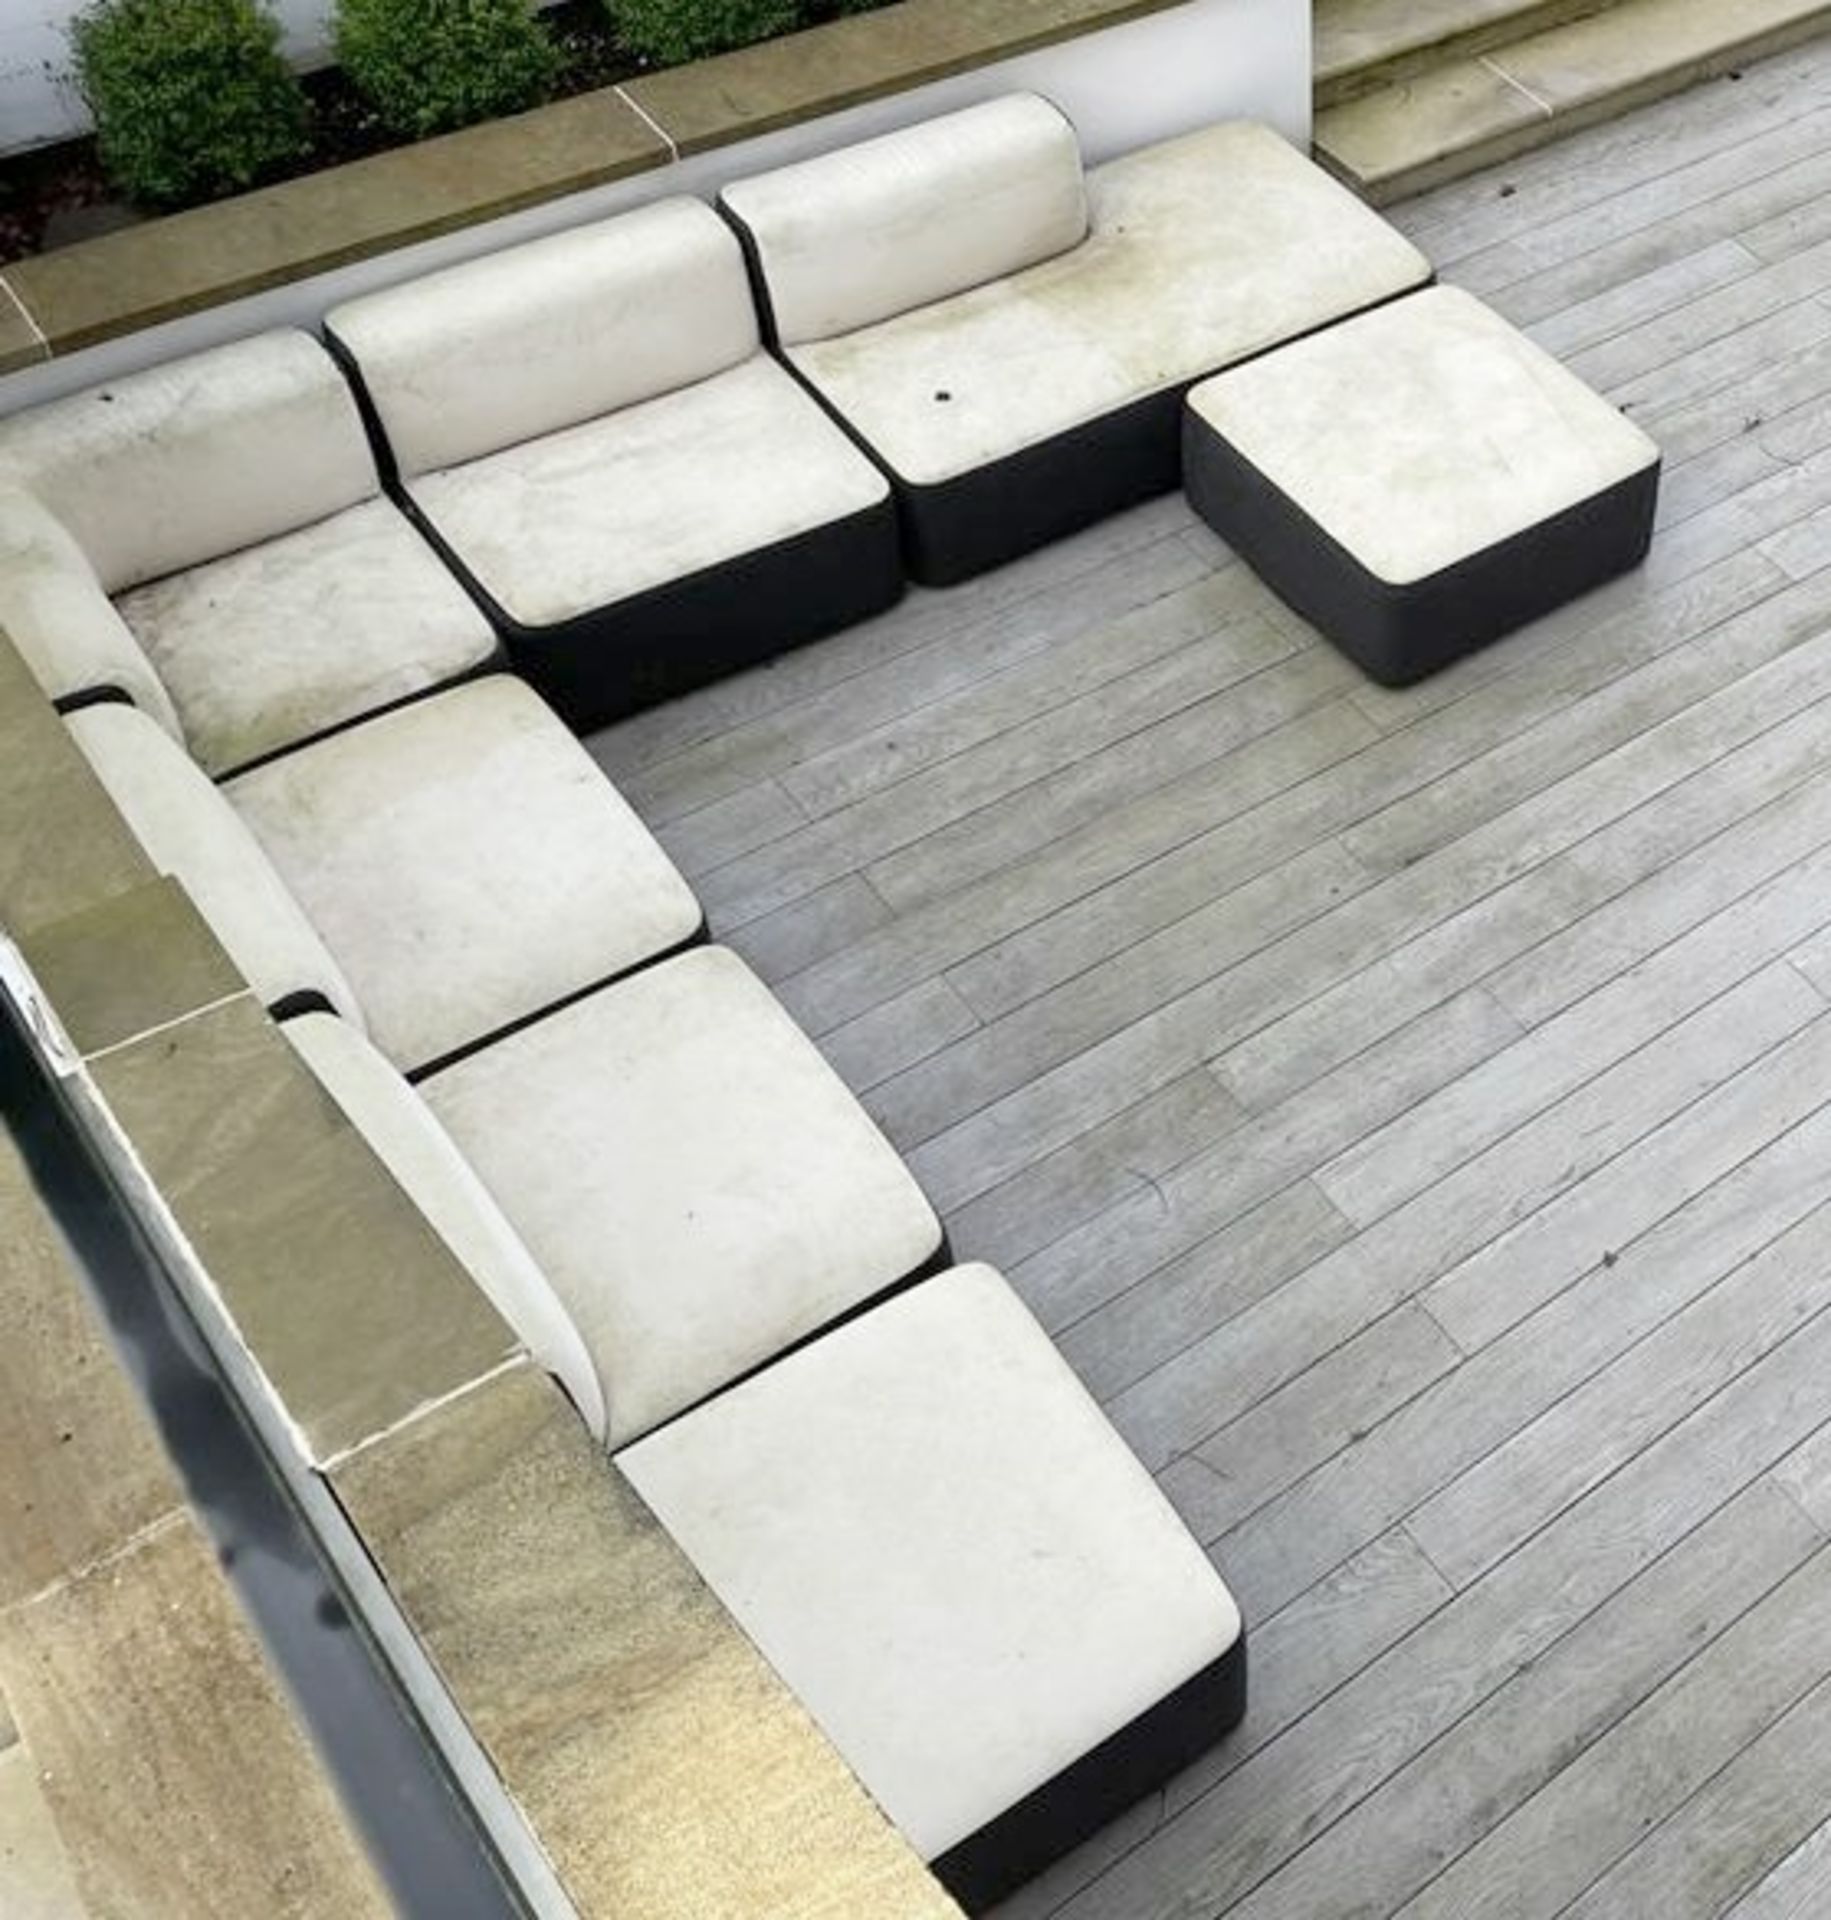 Large 7-Section VARASCHIN Modular Outdoor Corner Sofa Seating - Dimensions To Follow - From an - Image 12 of 12